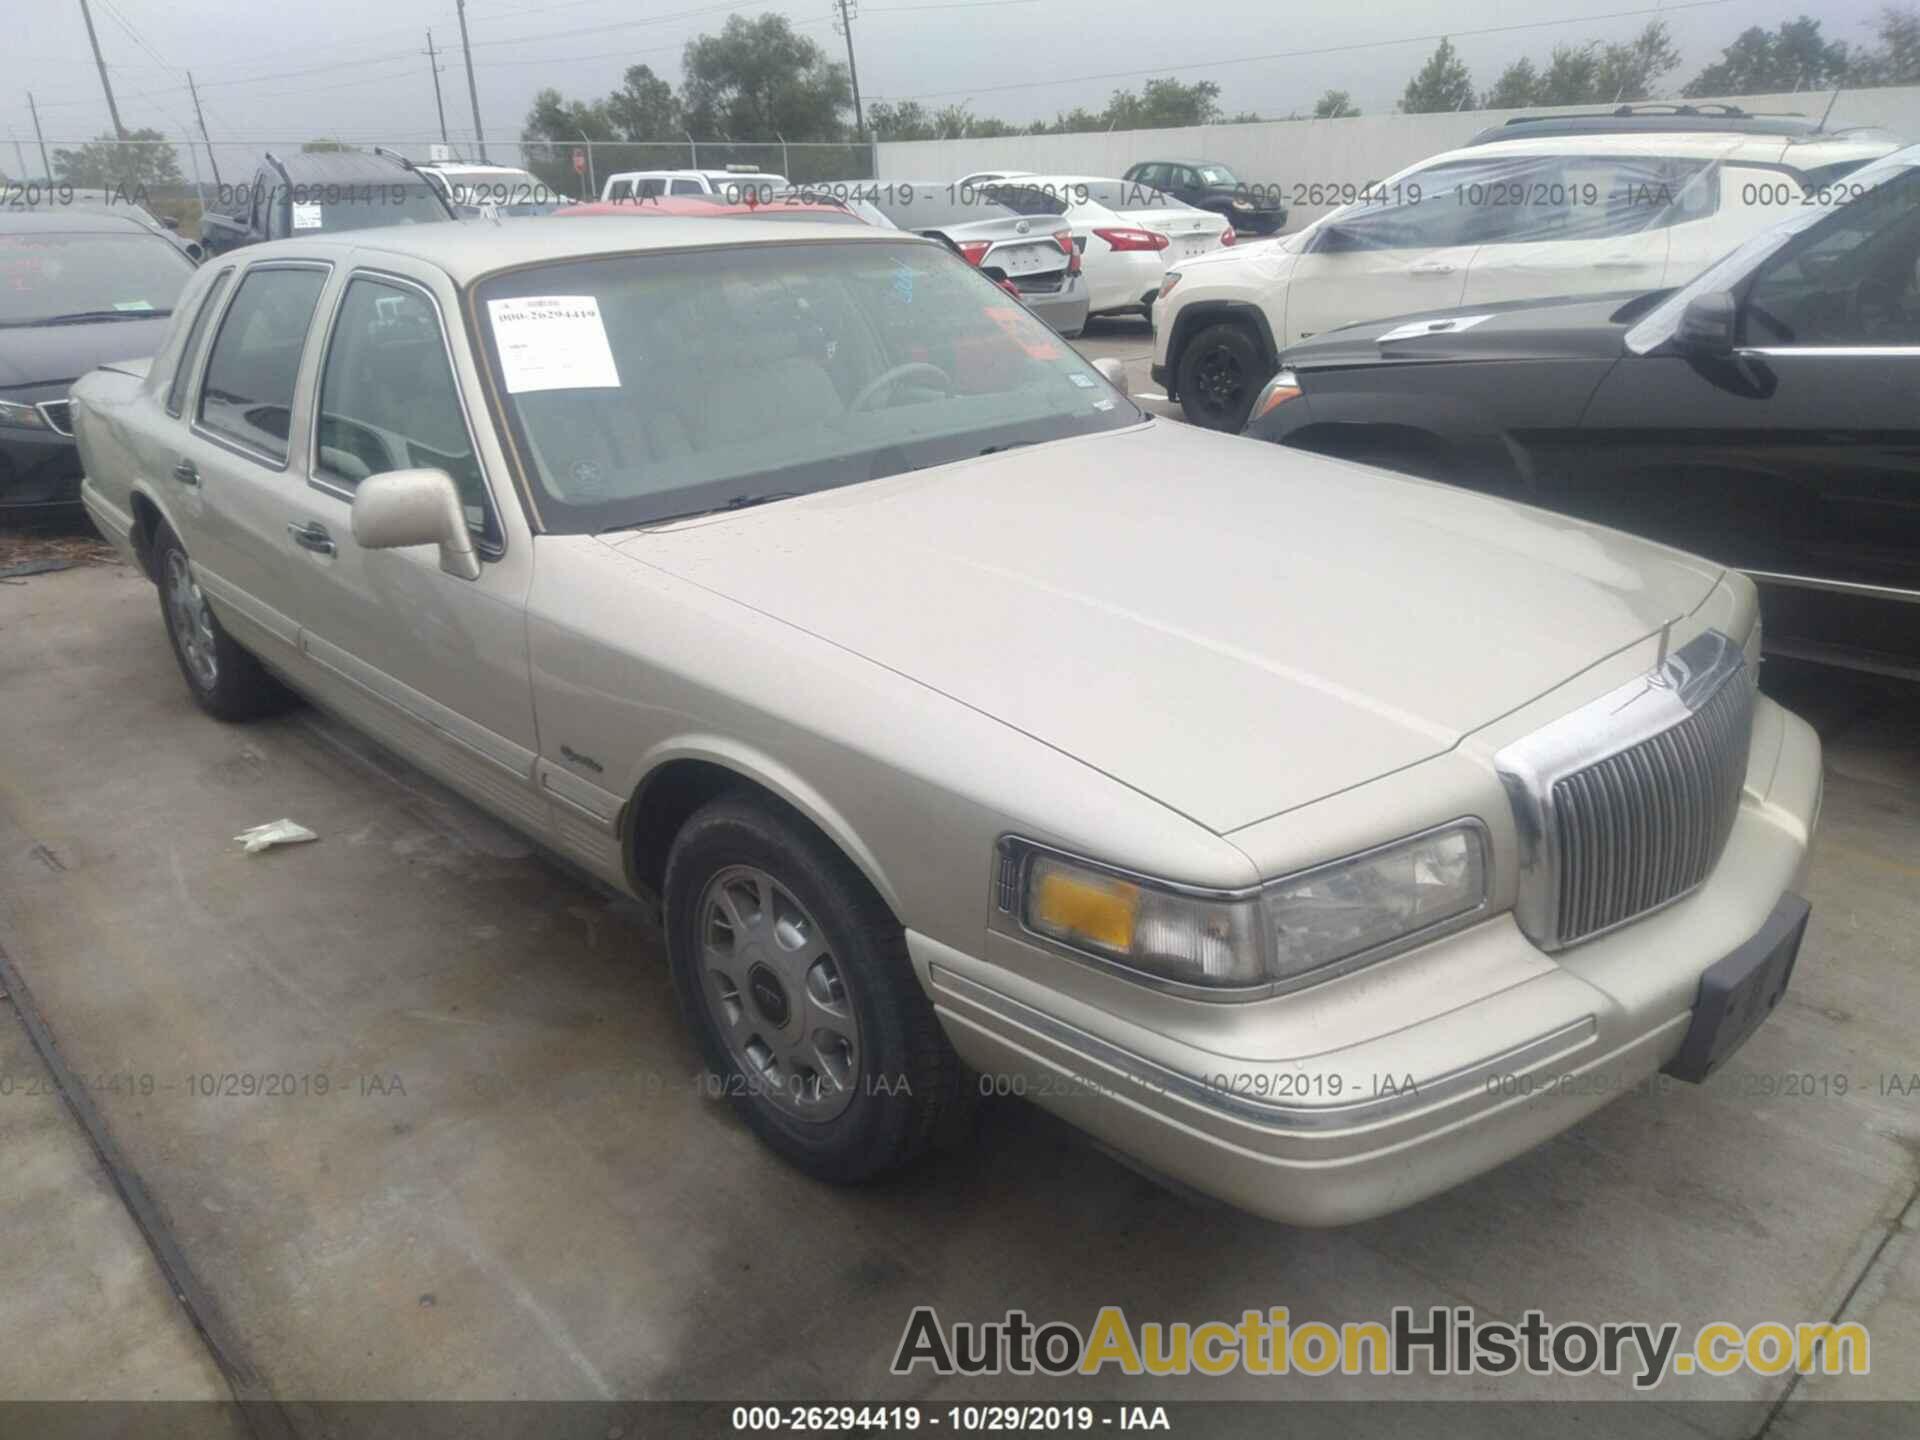 LINCOLN TOWN CAR SIGNATURE/TOURING, 1LNLM82W0VY686921